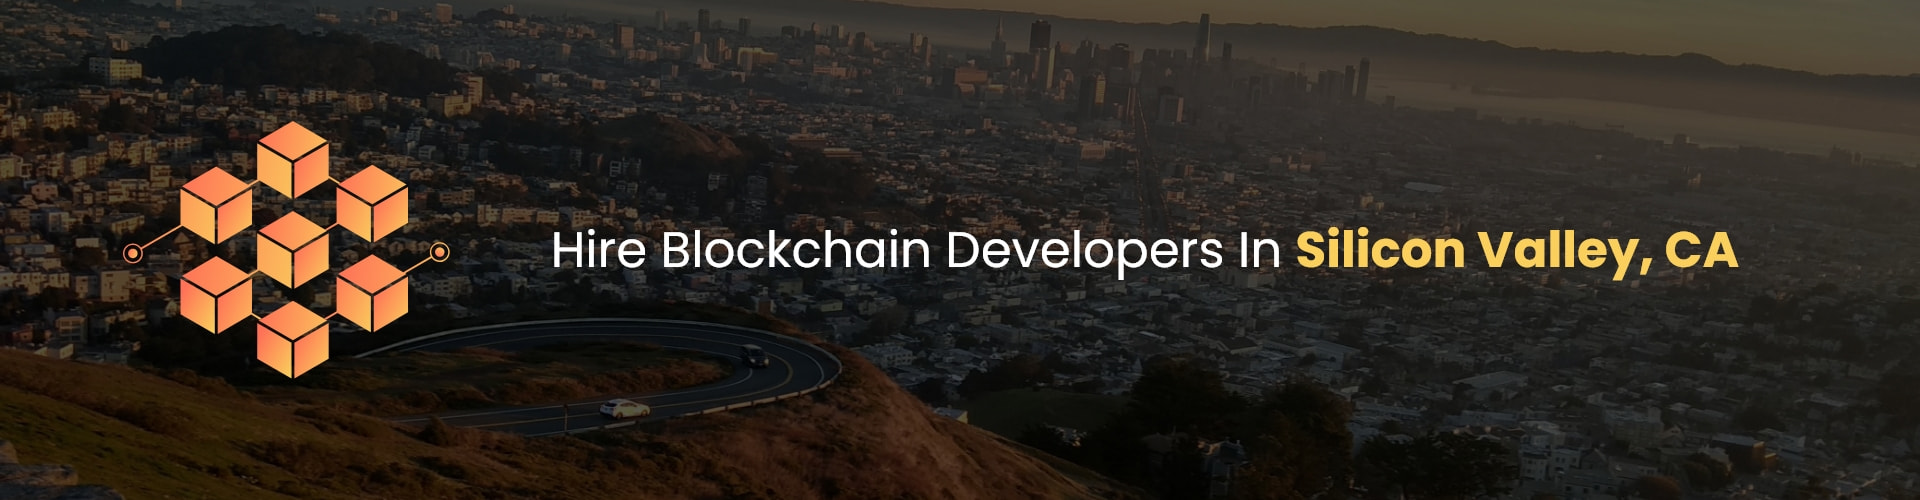 hire blockchain developers in silicon valley